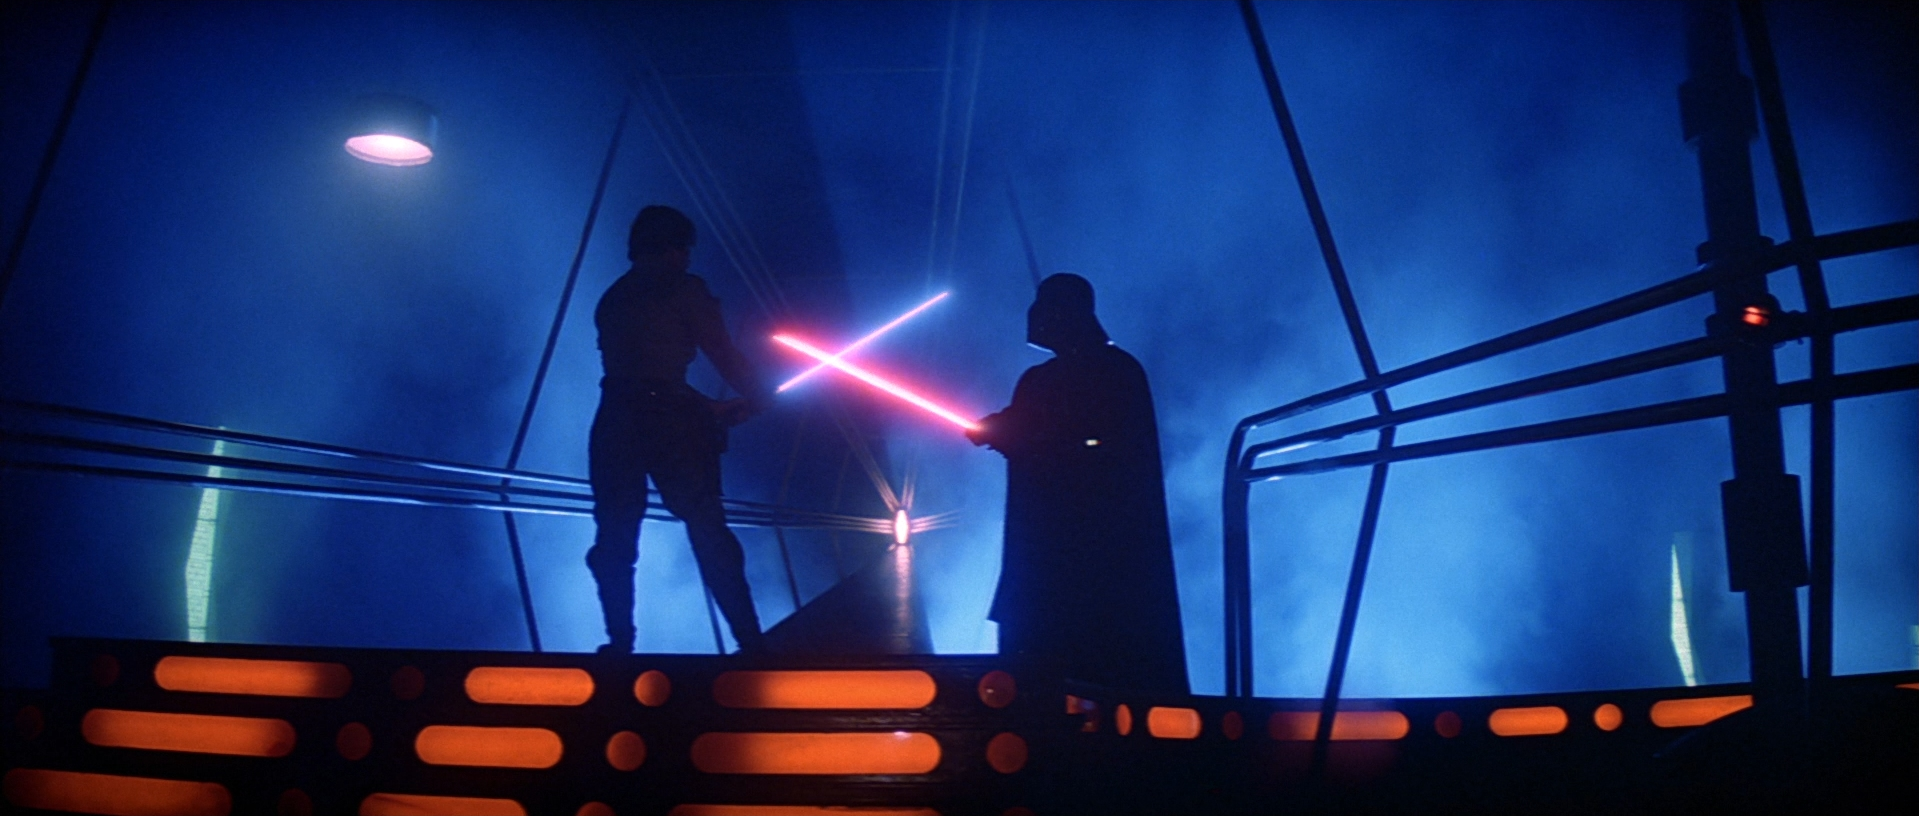 Who Directed 'Empire Strikes Back'?